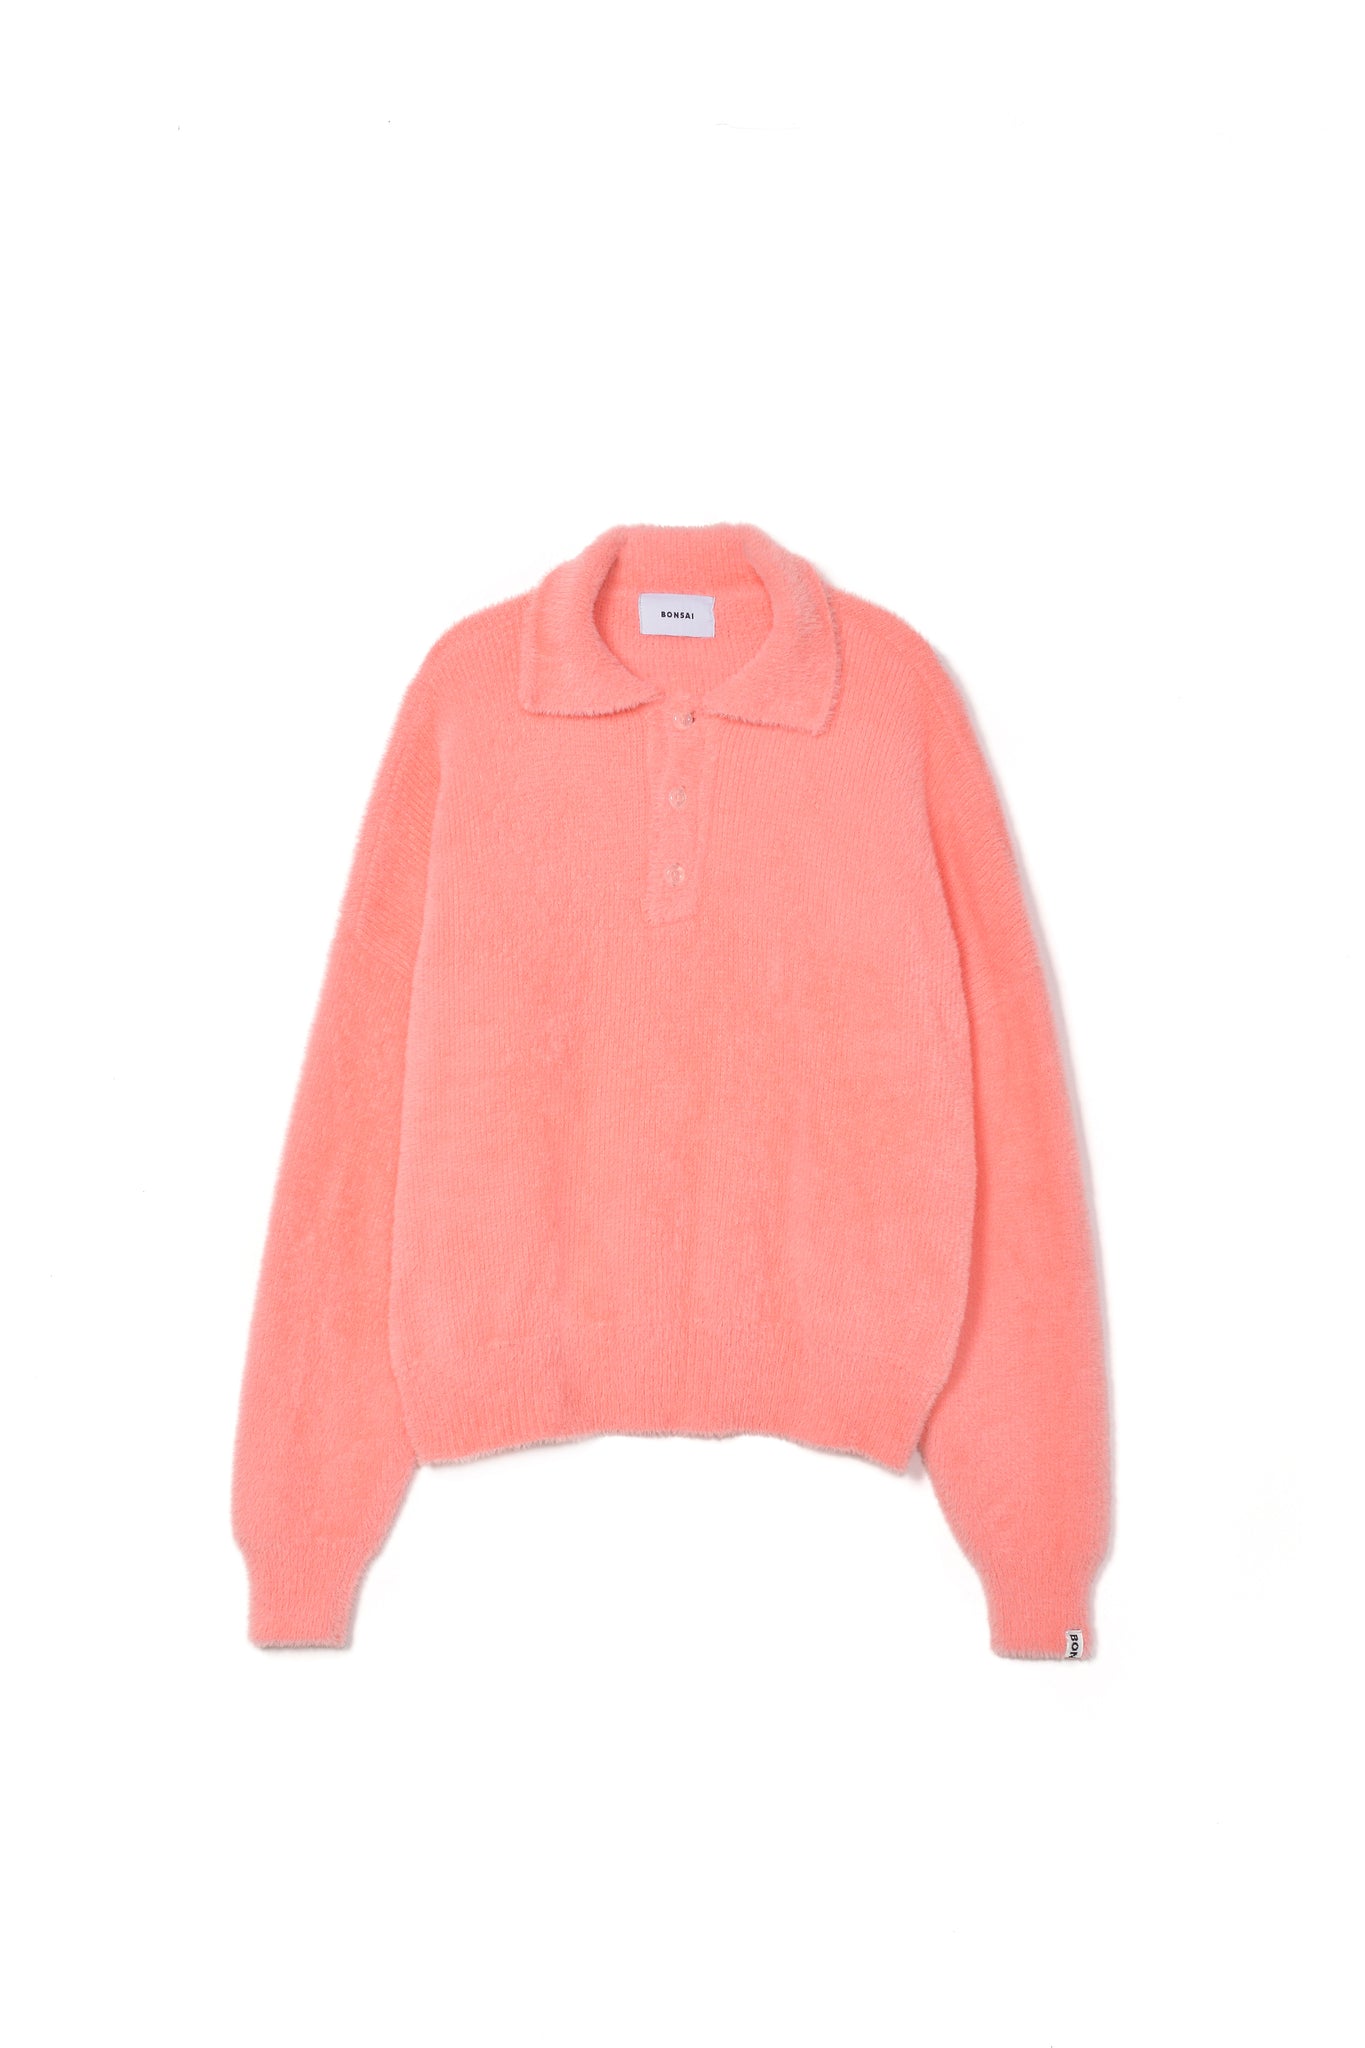 PEACHY FLUFFY POLO-UP TO 70% OFF